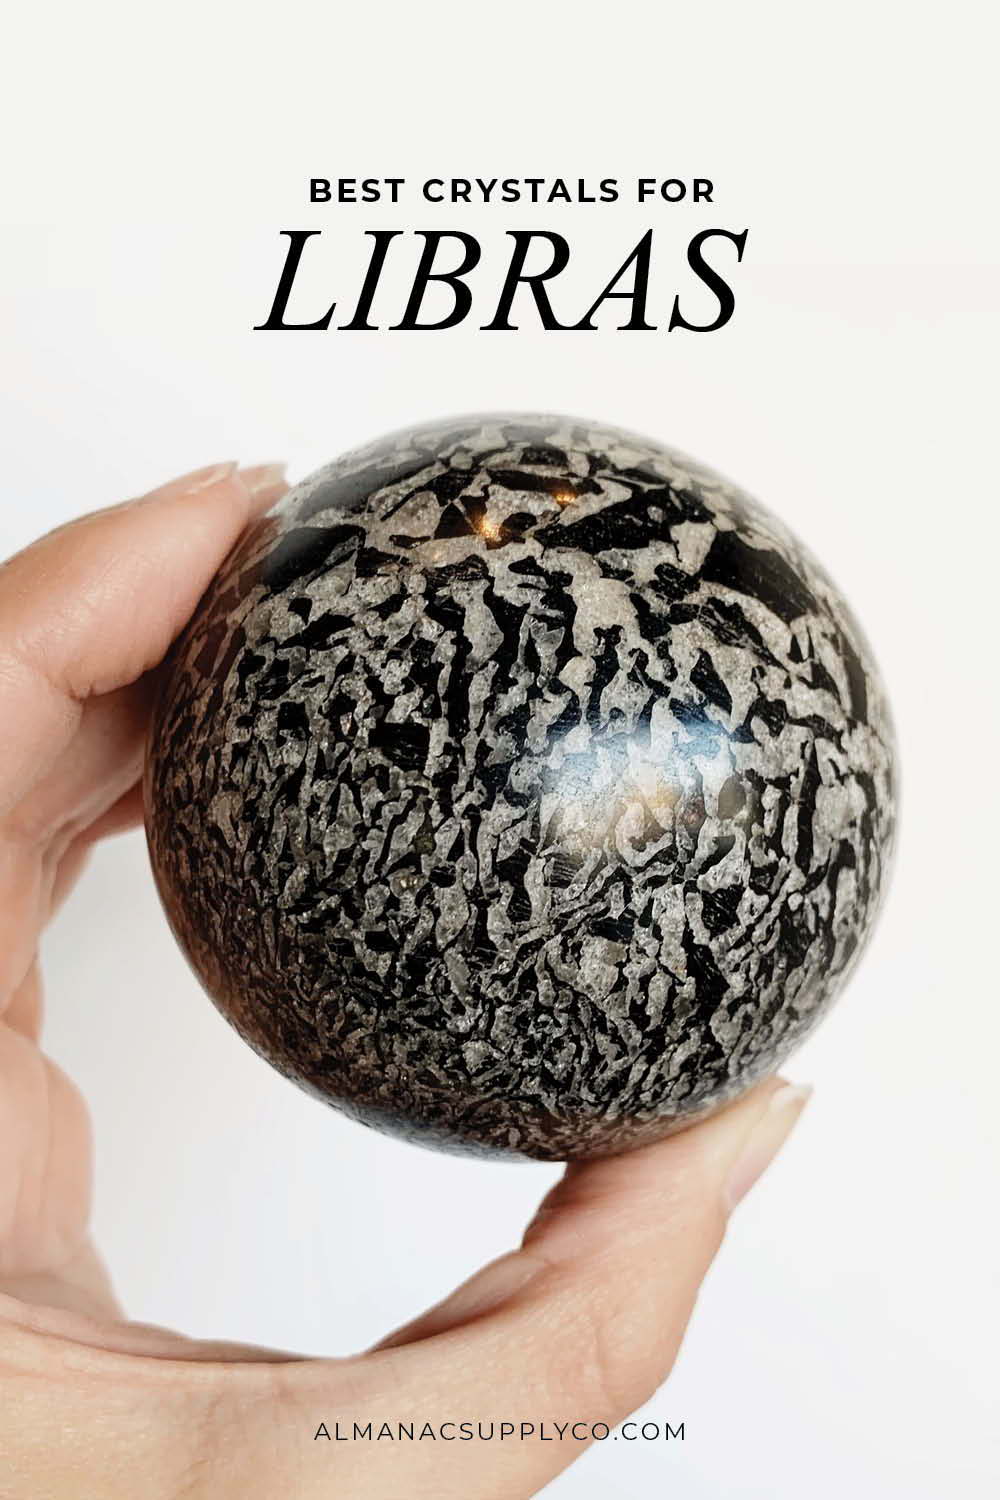 The Best Crystals for Libras